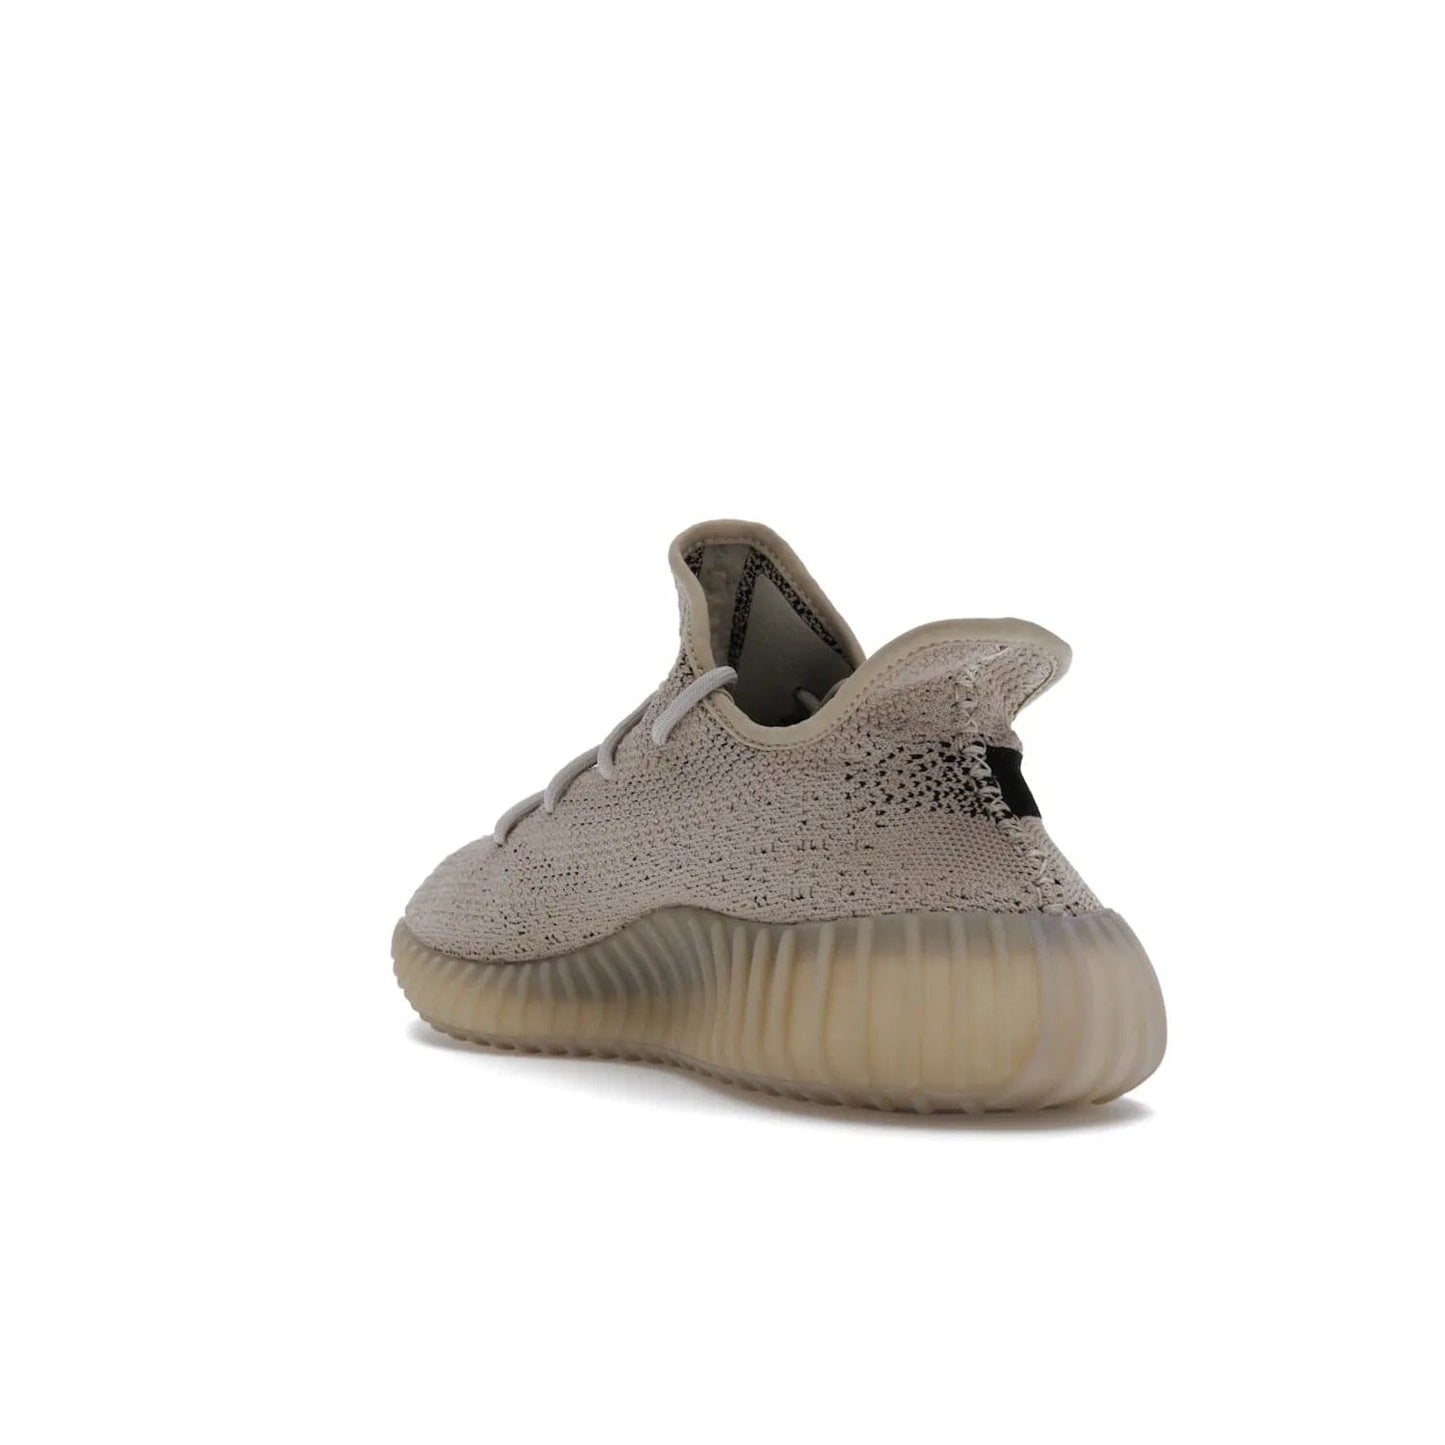 adidas Yeezy Boost 350 V2 Slate - Image 25 - Only at www.BallersClubKickz.com - Adidas Yeezy Boost 350 V2 Slate Core Black Slate featuring Primeknit upper, Boost midsole and semi-translucent TPU cage. Launched on 3/9/2022, retailed at $230.